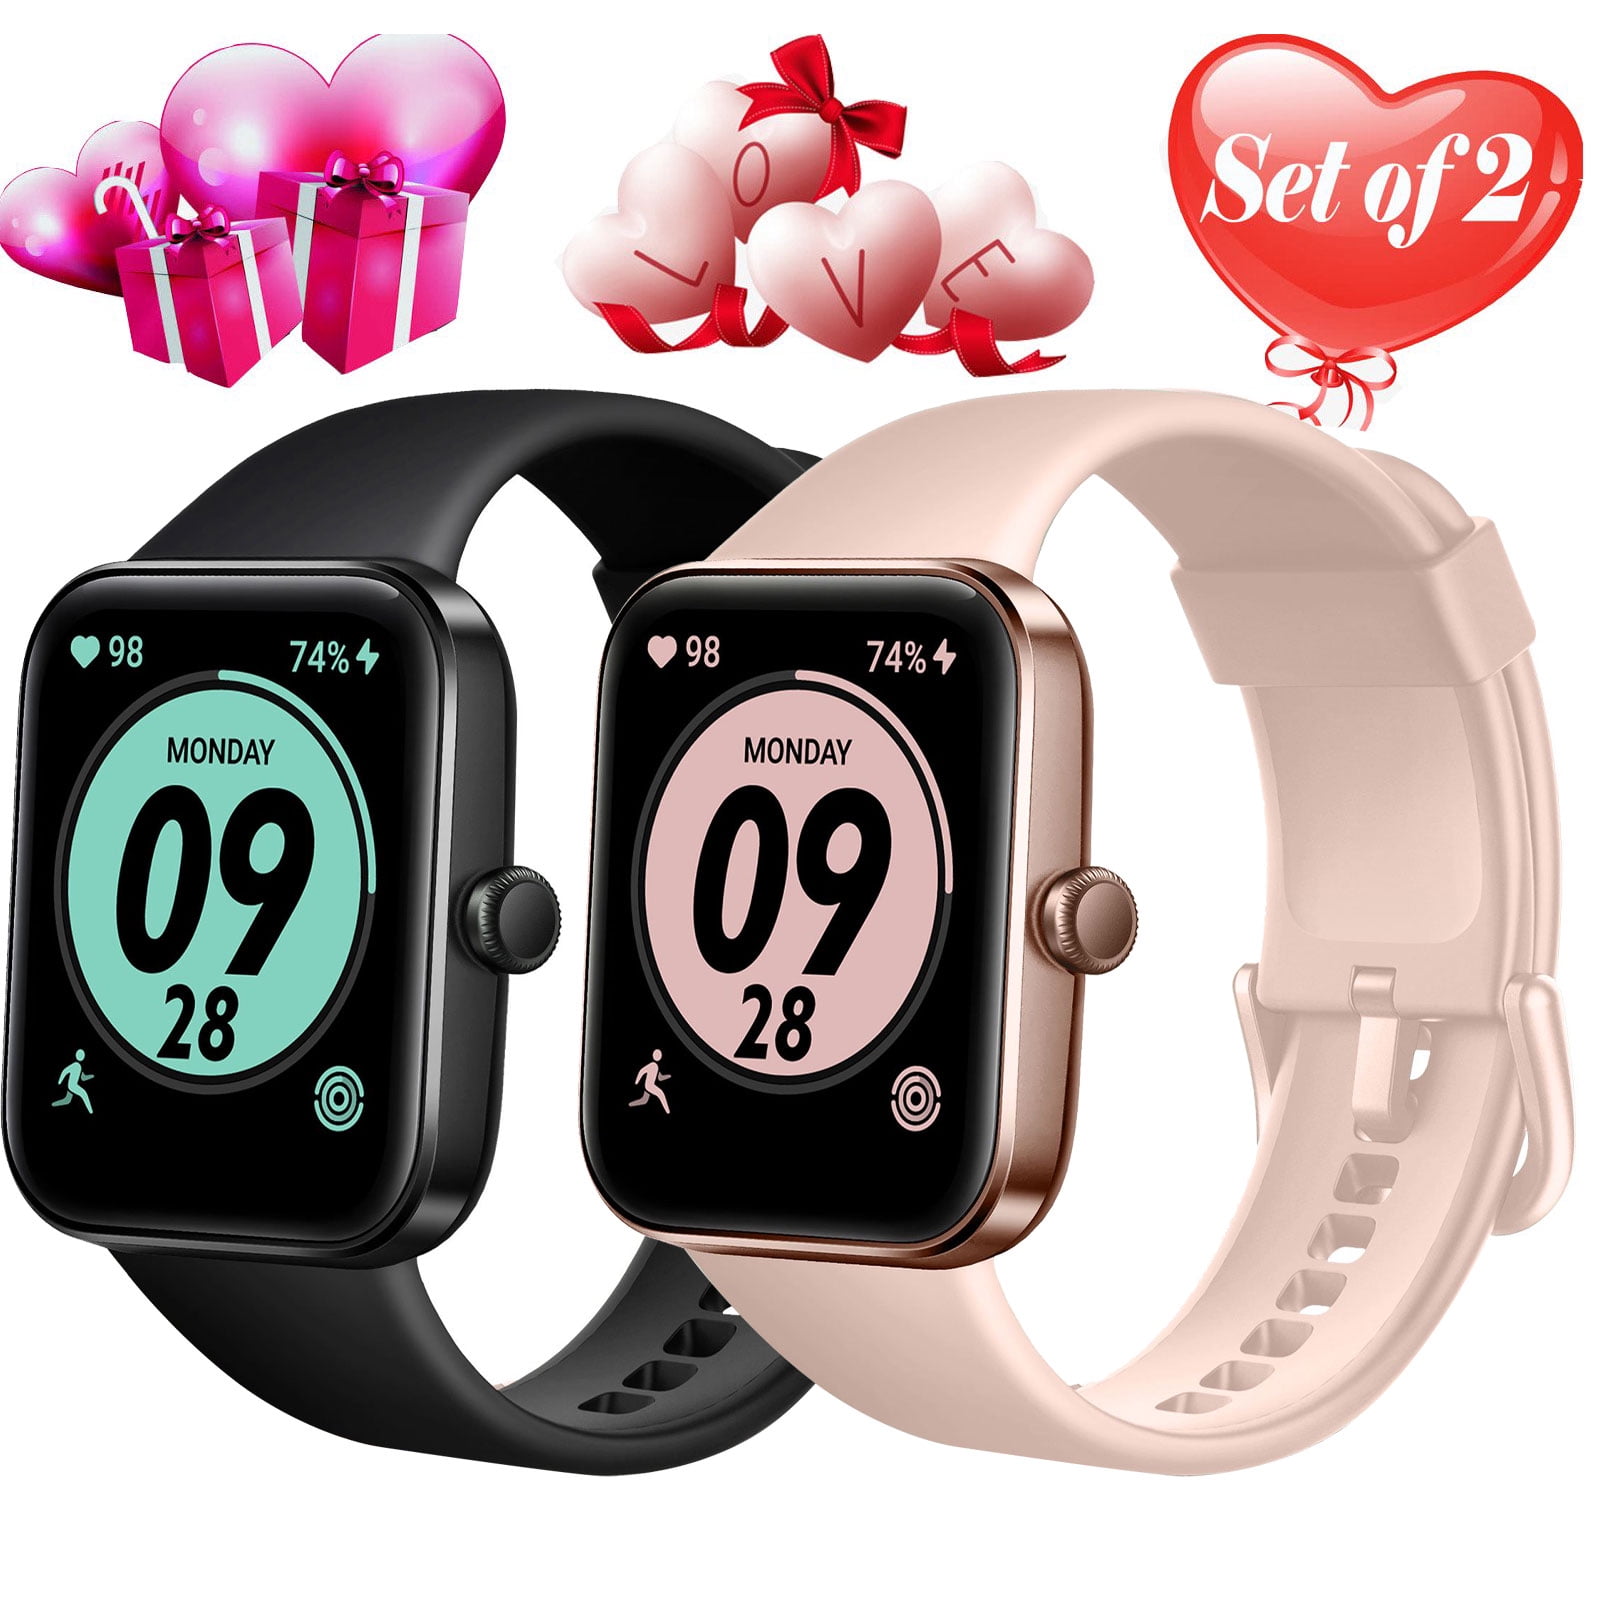 Smart Watch Fit for Android iPhone Device, Full Touch Screen Bluetooth Fitness Tracker with Heart Rate Blood Pressure Monitor, Temperature Test, Waterproof Pedometer Smartwatch for Men Women, Set of 2